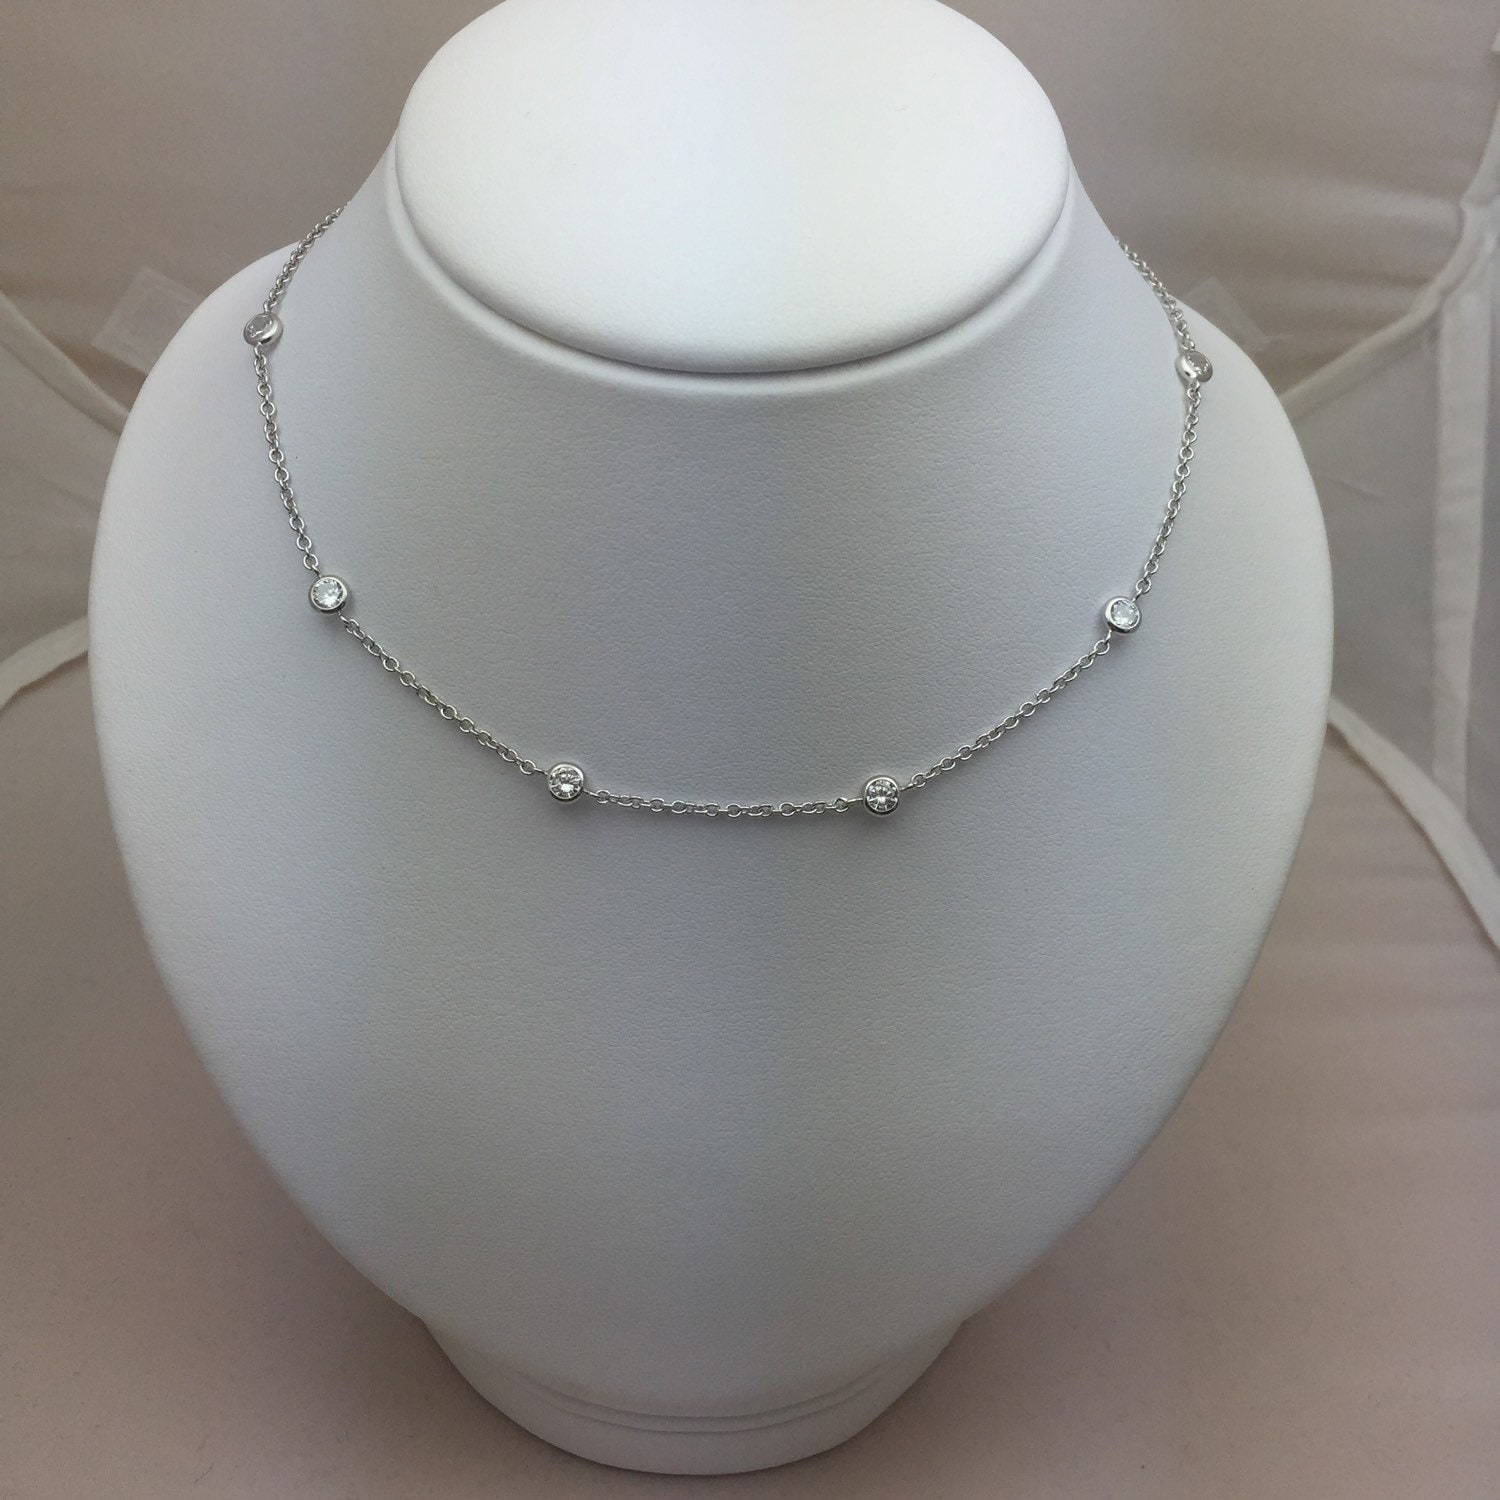 Diamonds by the Yard Look Alike Necklace 18 inches long